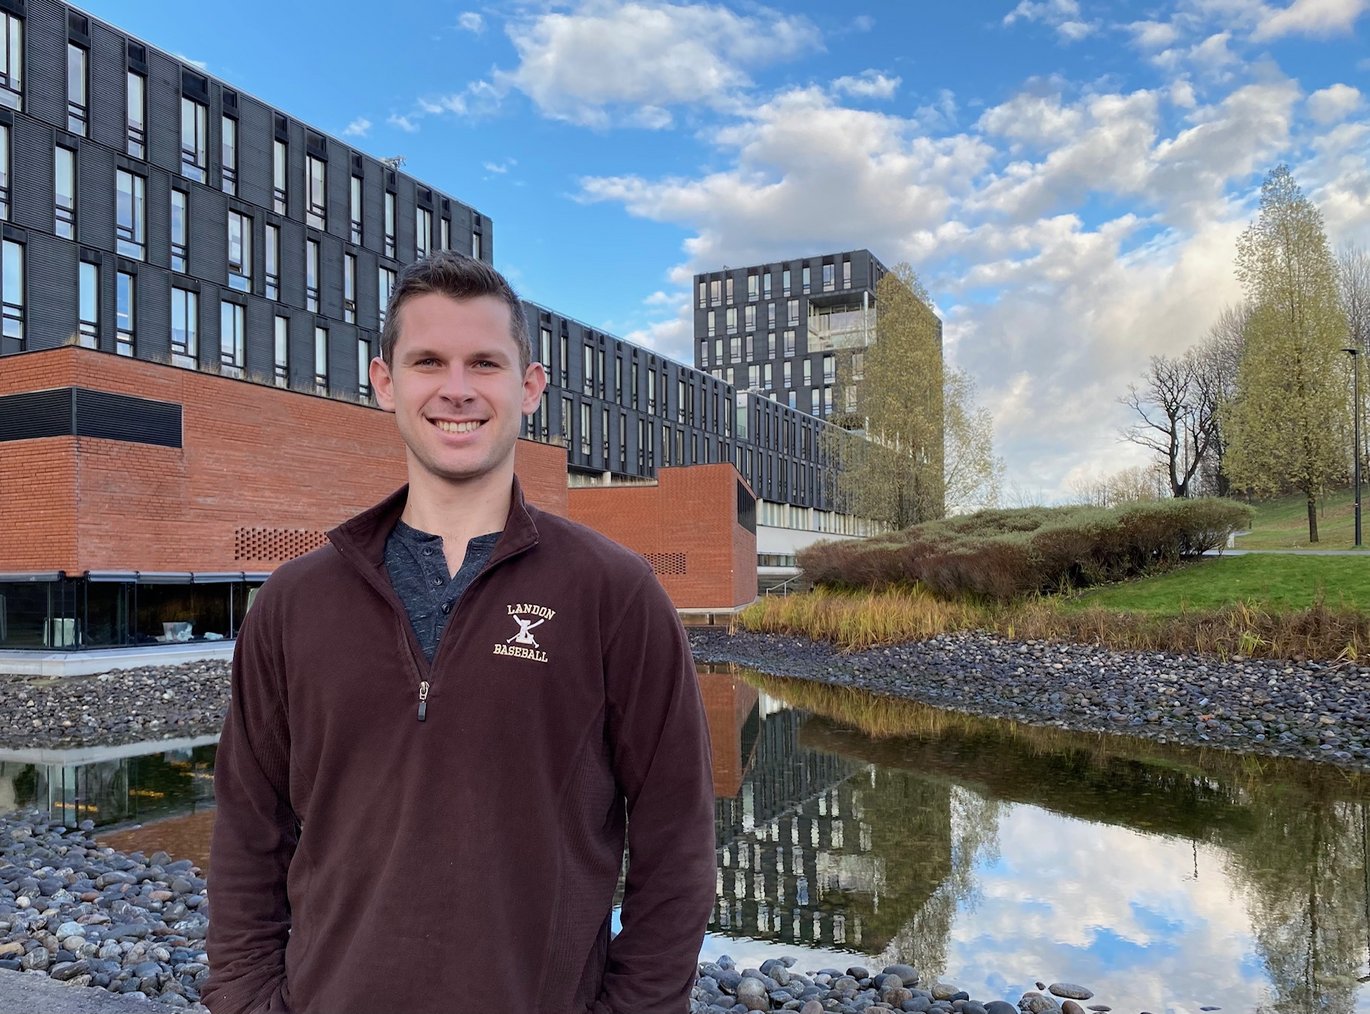 Alex Harvey in a burgandy sweater with research buildings in background.